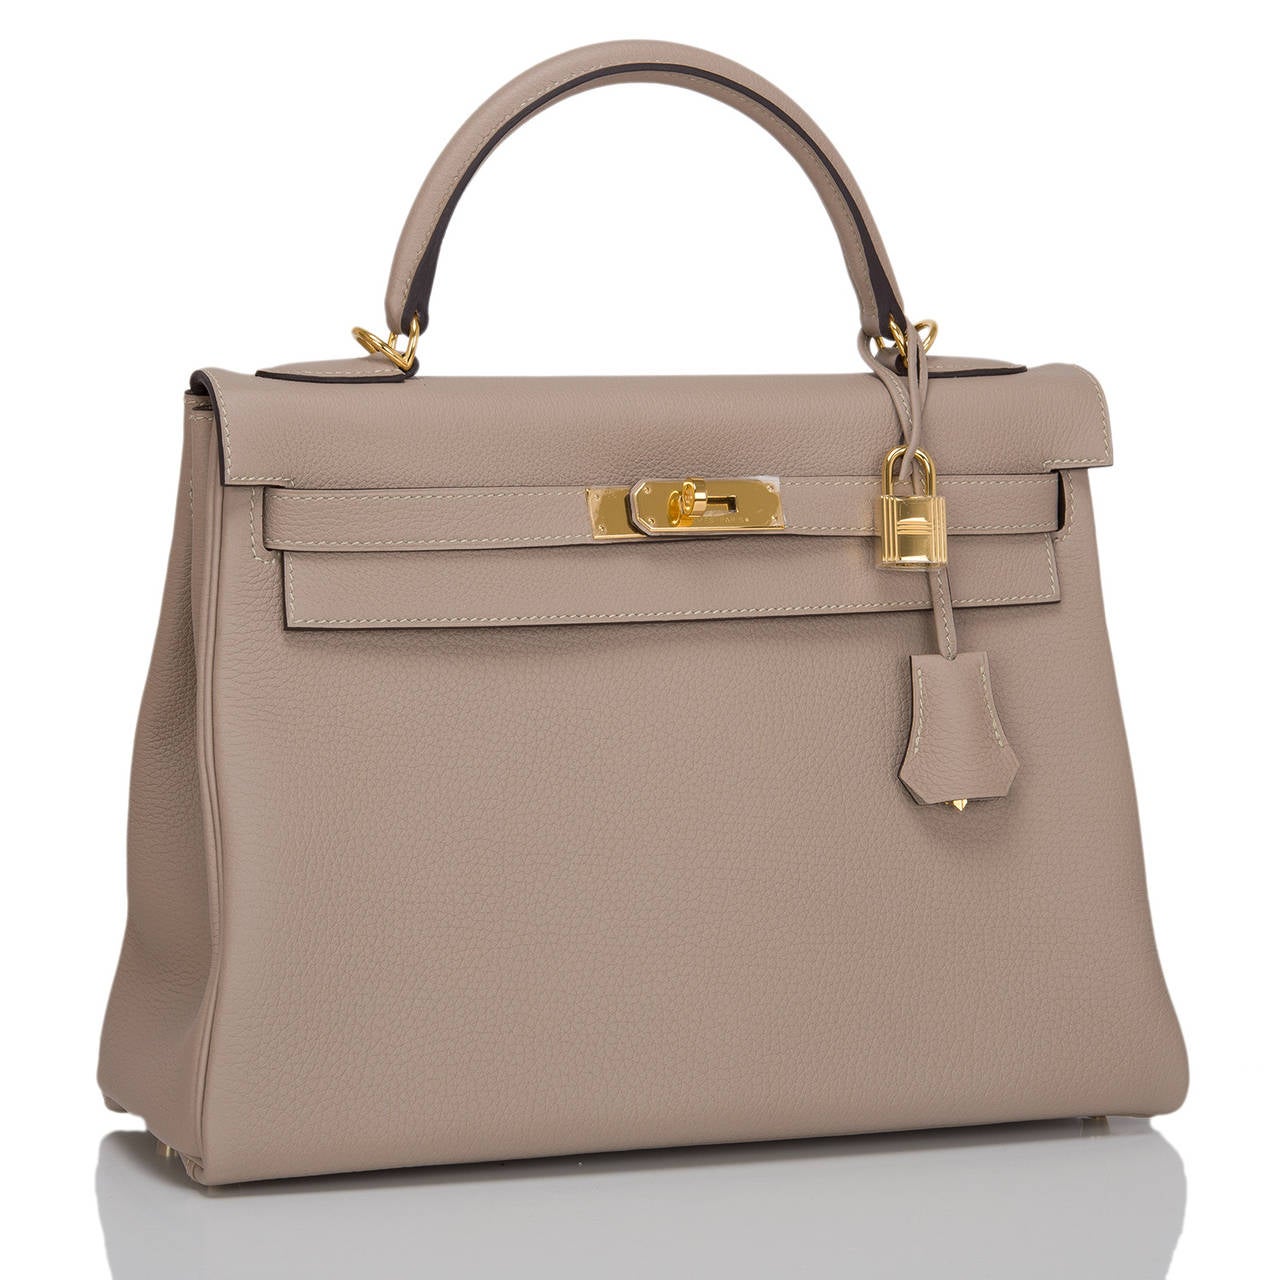 Hermes Gris Tourterelle Kelly 32cm in rich togo (bull) leather with gold hardware.

This Kelly features tonal stitching, front toggle closure, a clochette with lock and two keys and a single rolled handle. The interior is lined in Gris T chevre